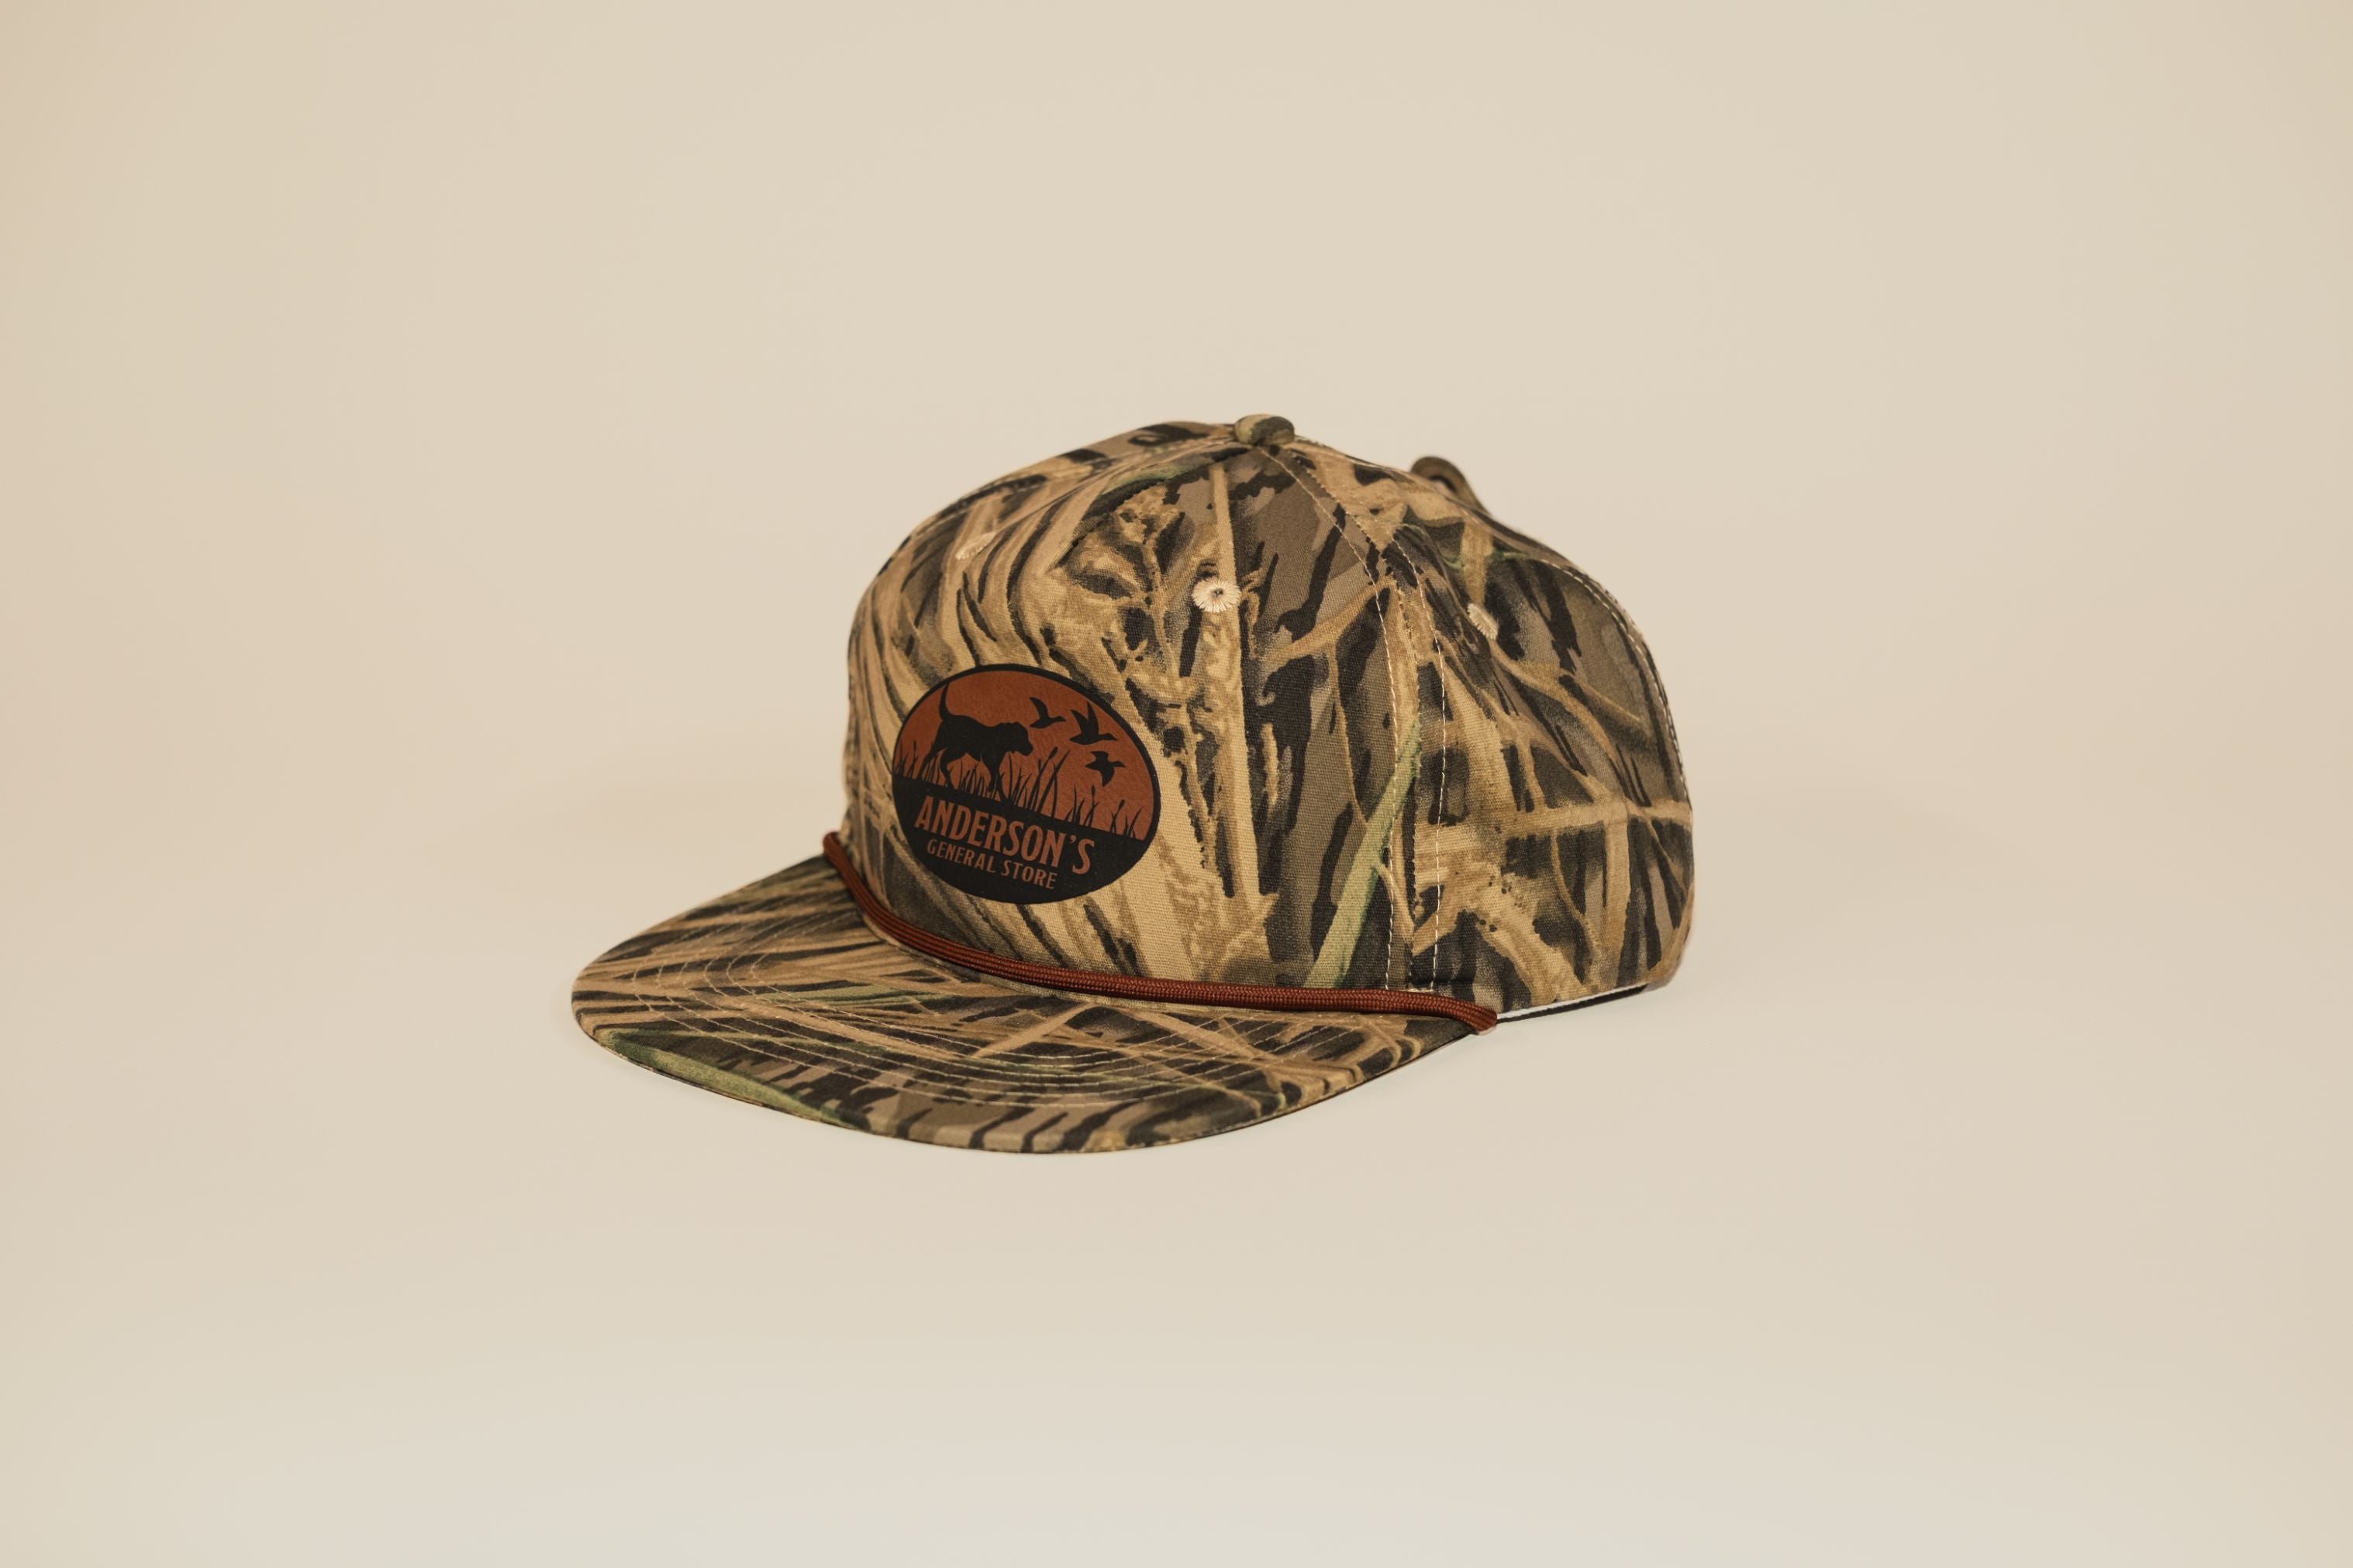 Ursa Major Leather Patch Hat - Old East Rags - Apparel and Adventure